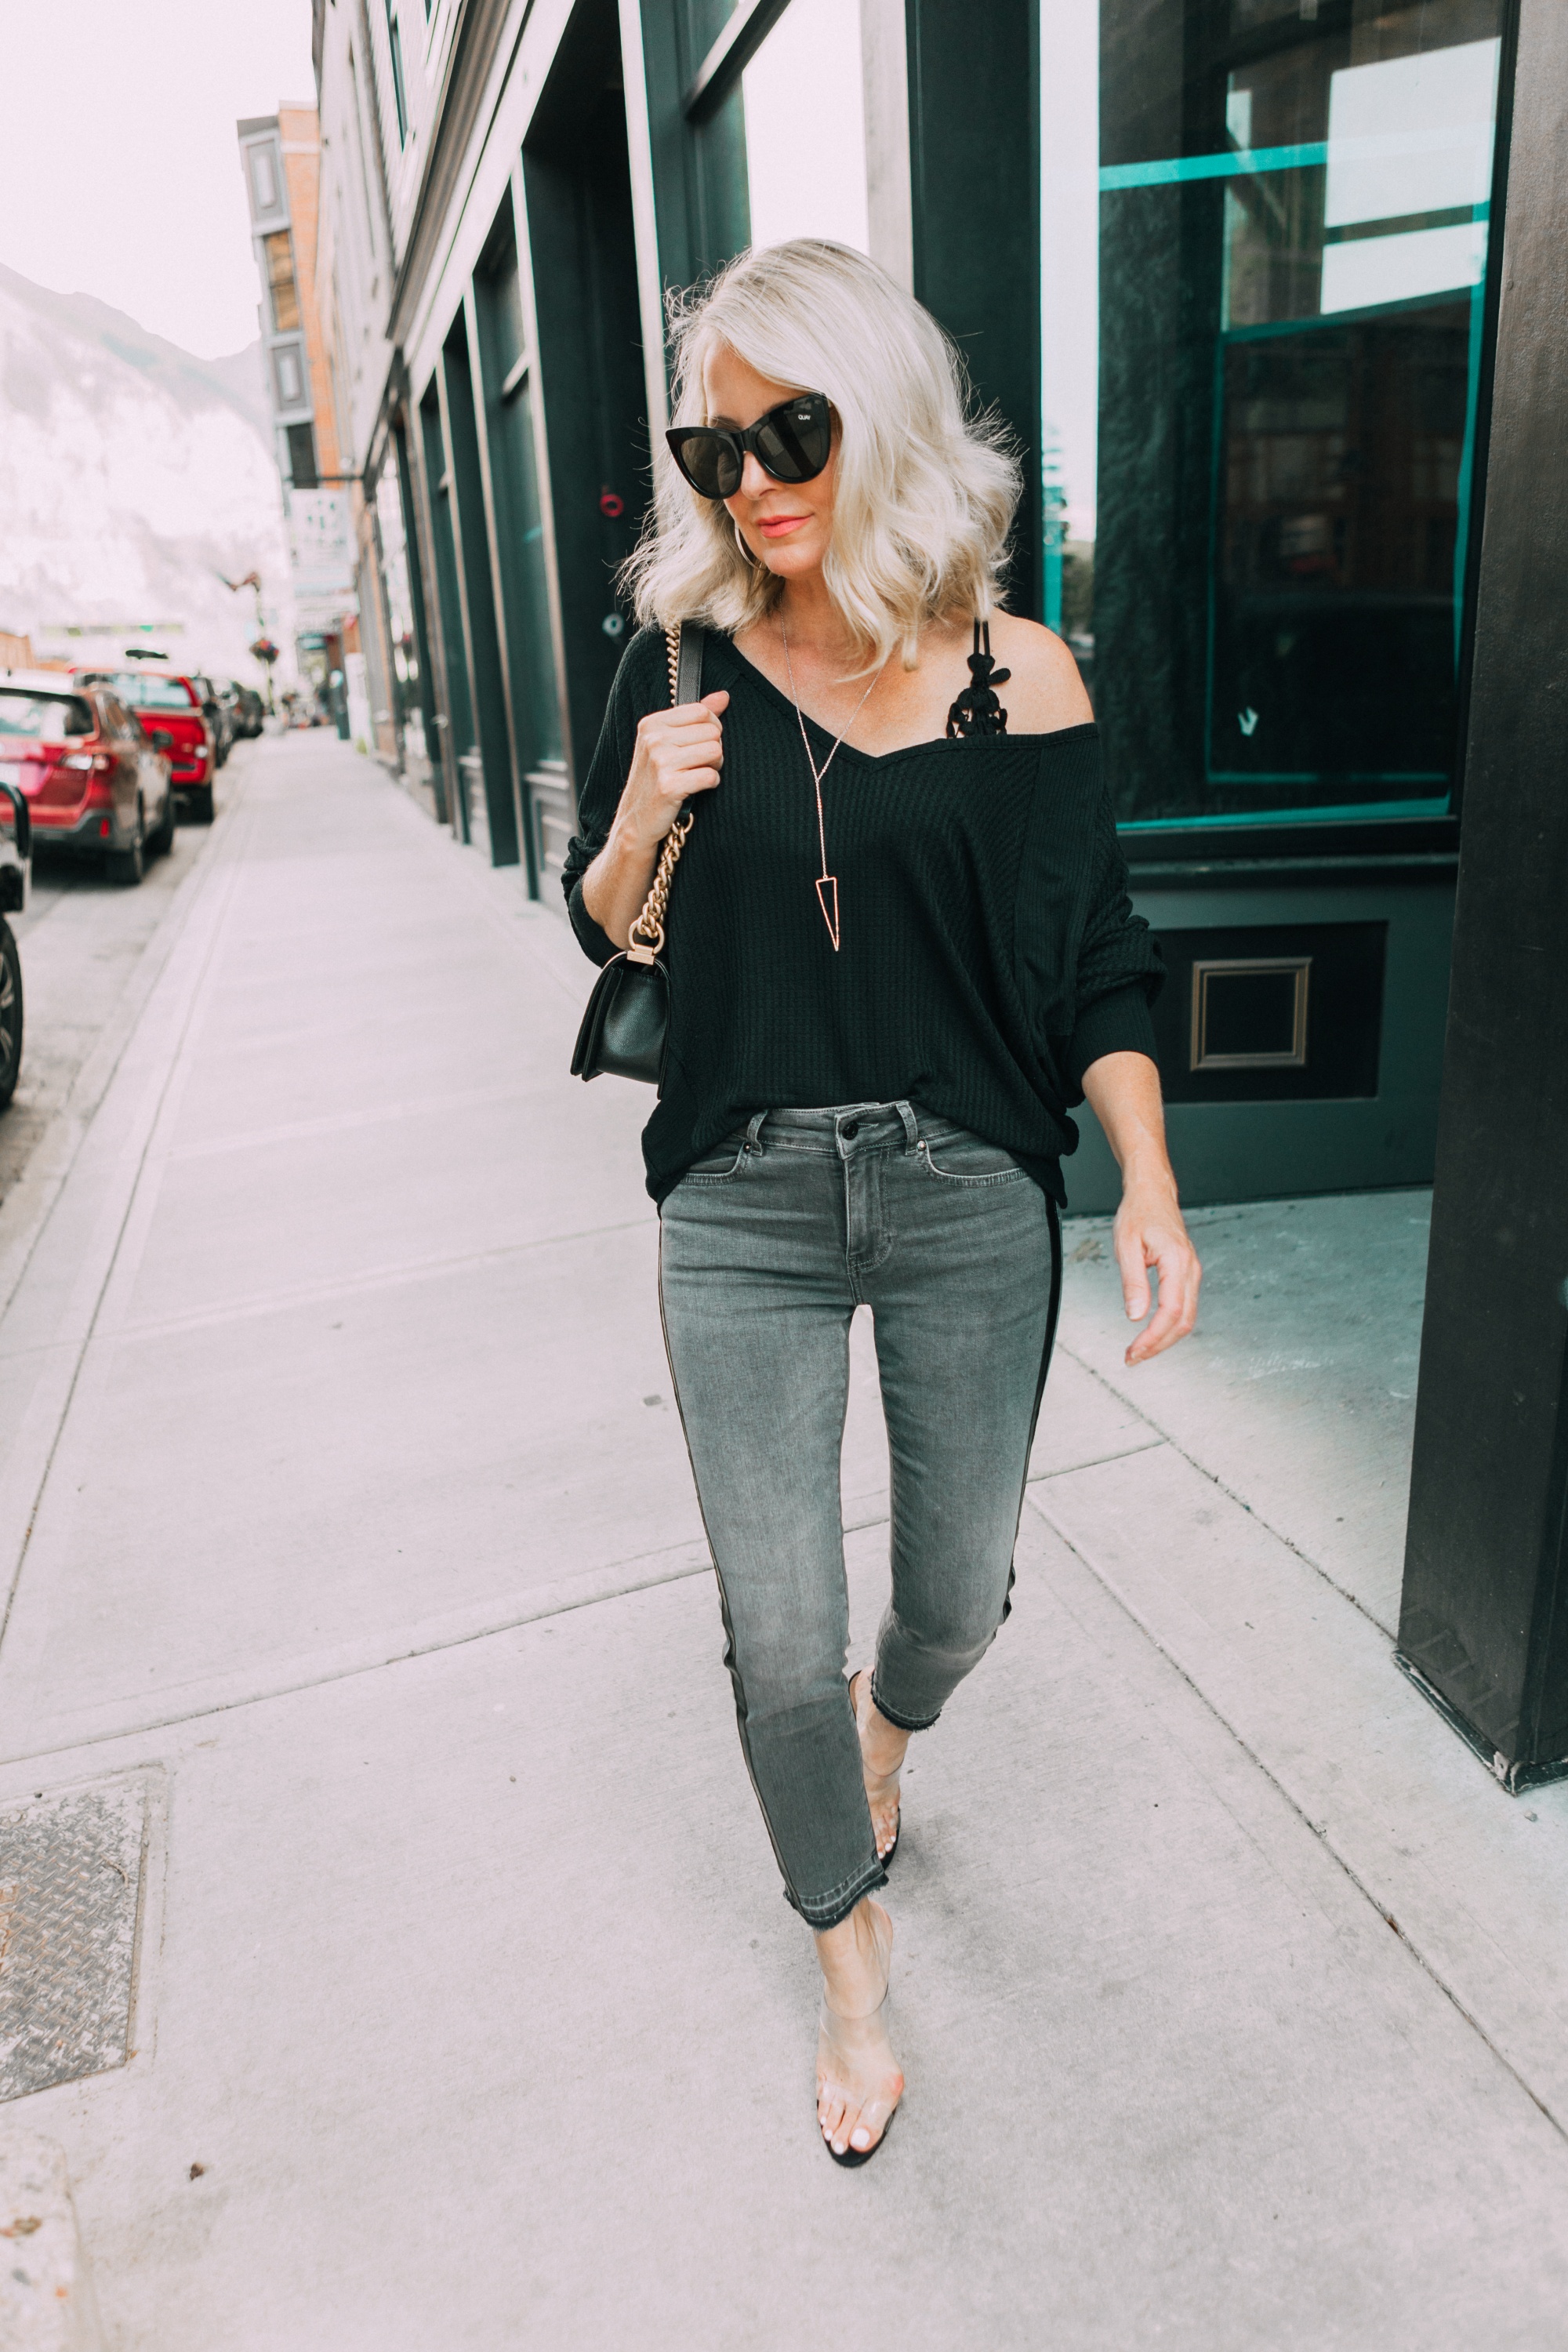 Striped Jeans, Fashion blogger Erin Busbee of BusbeeStyle.com wearing black patent striped jeans by Escada, waffle knit tee by Free People, bralette by Free People, heels by Schutz, and Chanel bag from Bloomingdale's in Telluride, CO